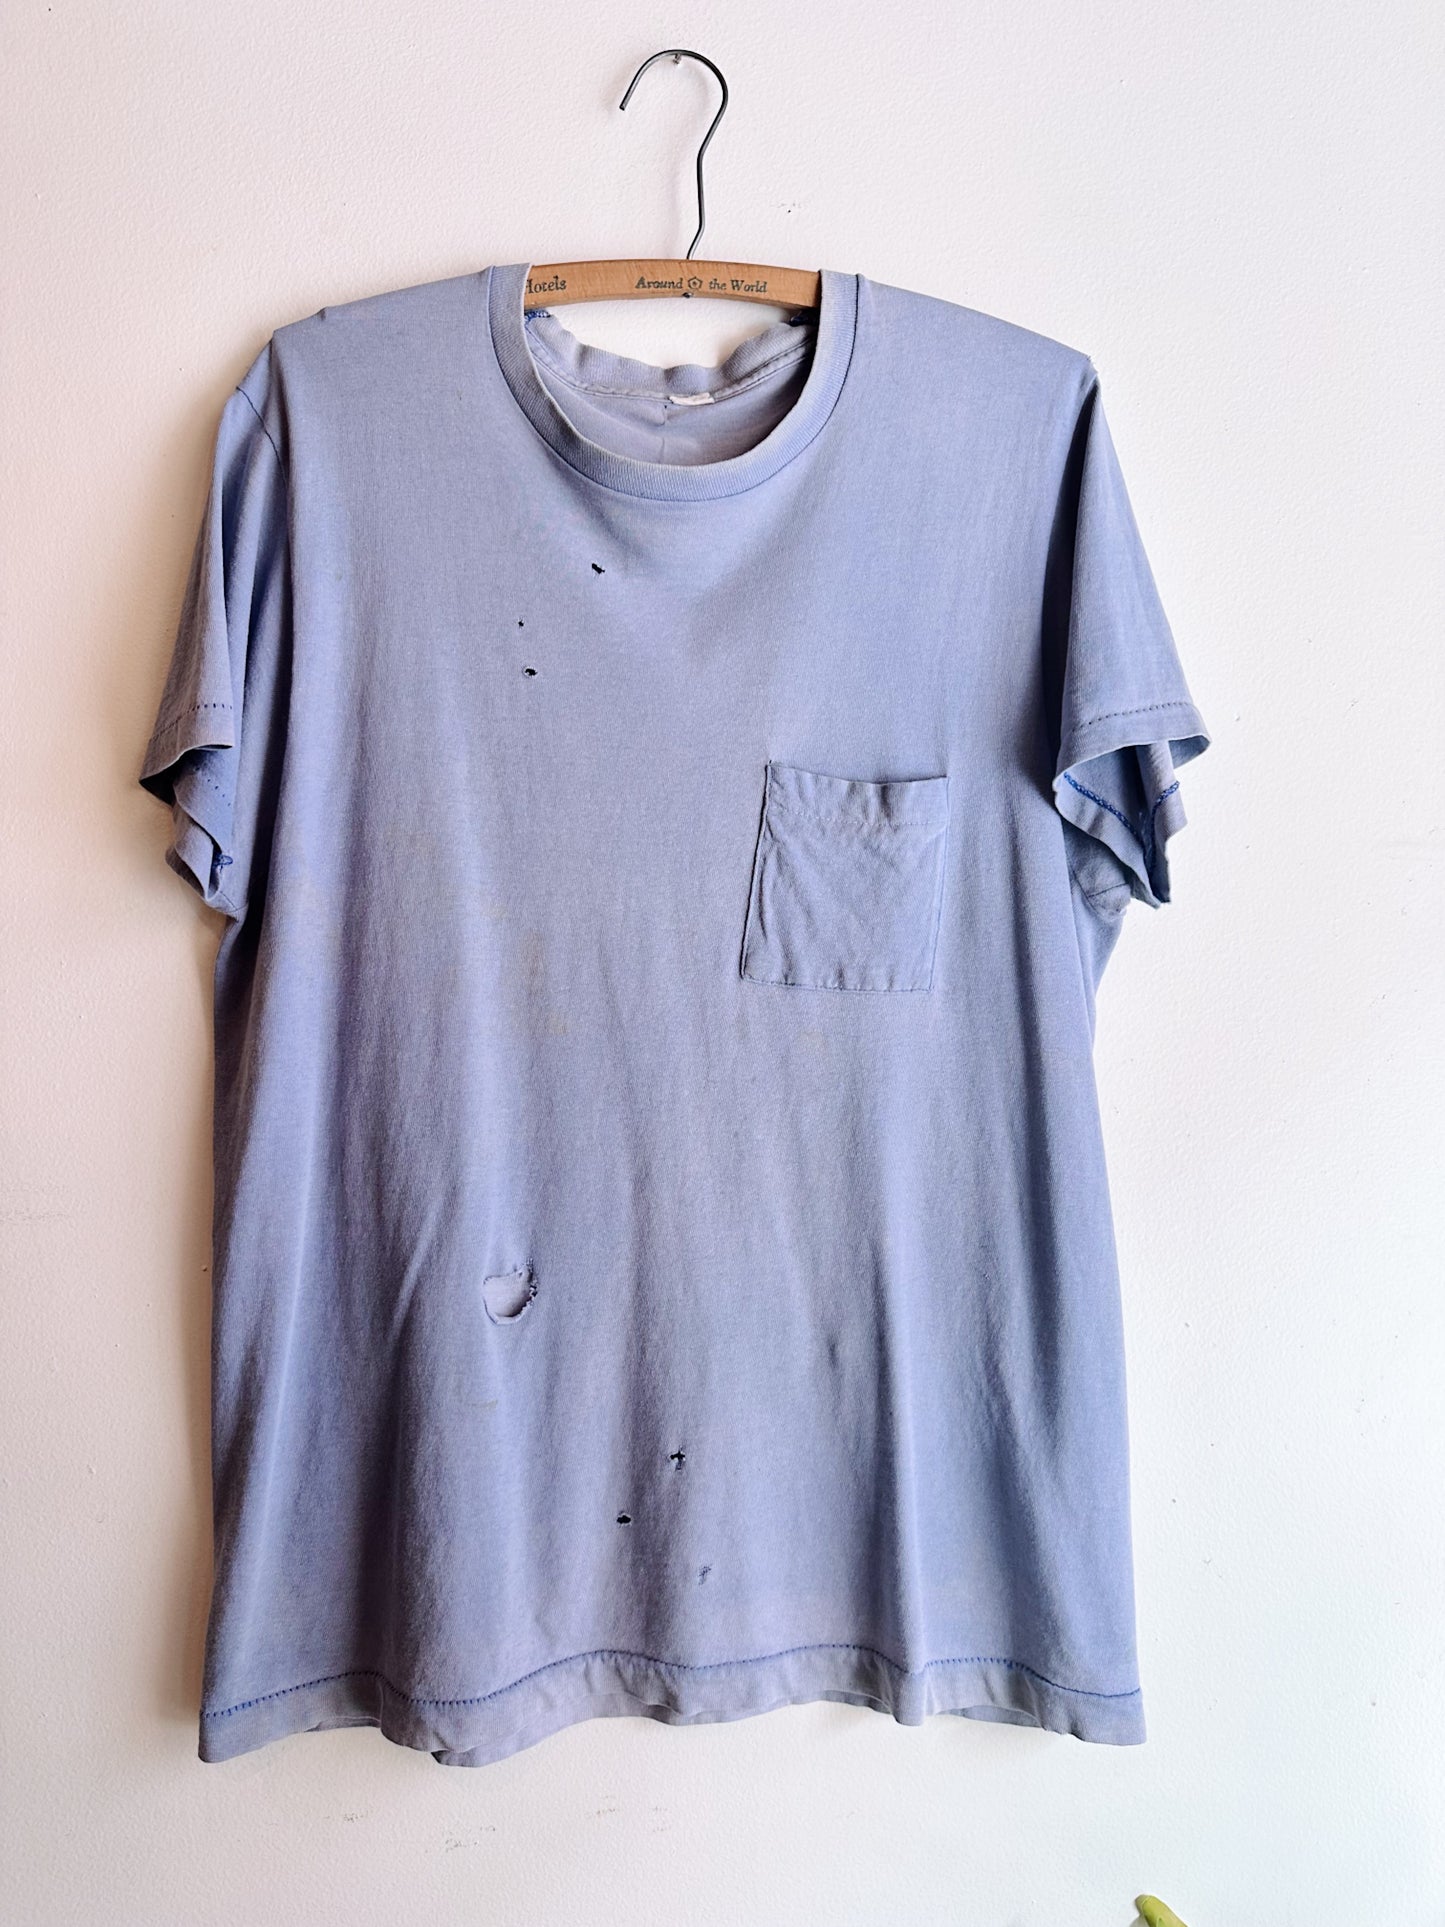 sunfaded one pocket tee with holes 